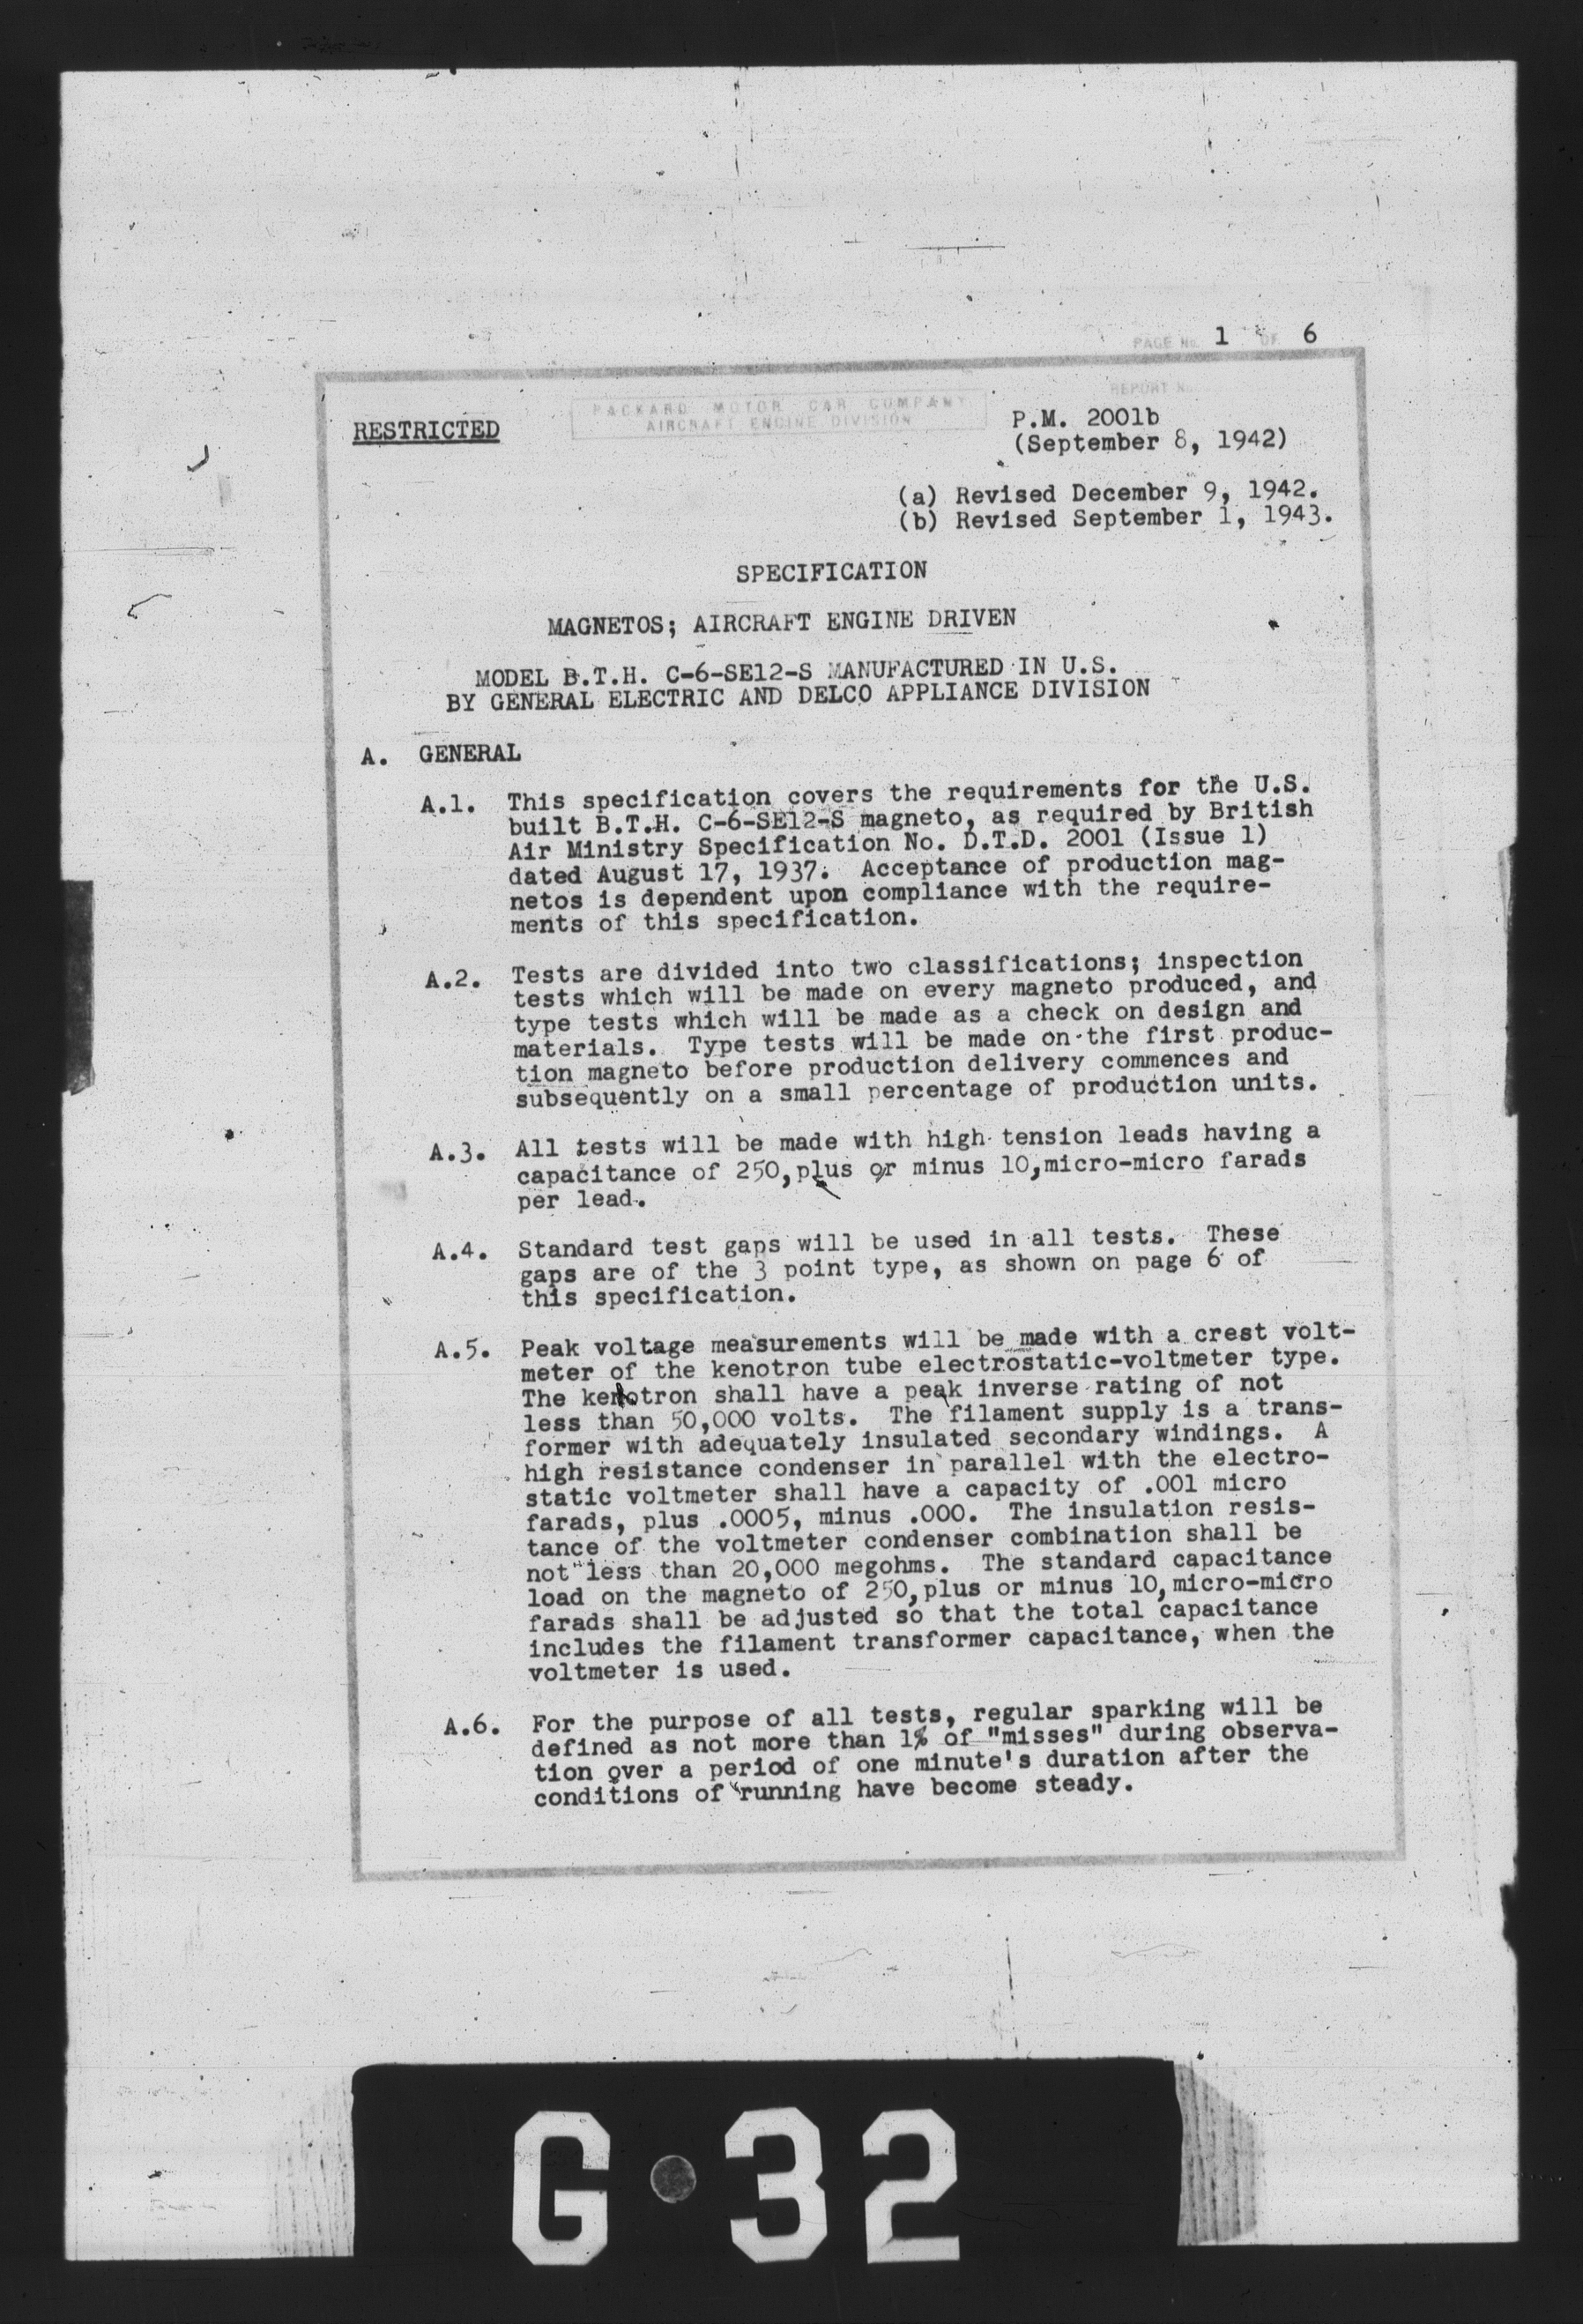 Sample page 1 from AirCorps Library document: Aircraft Engine Driven Magnetos